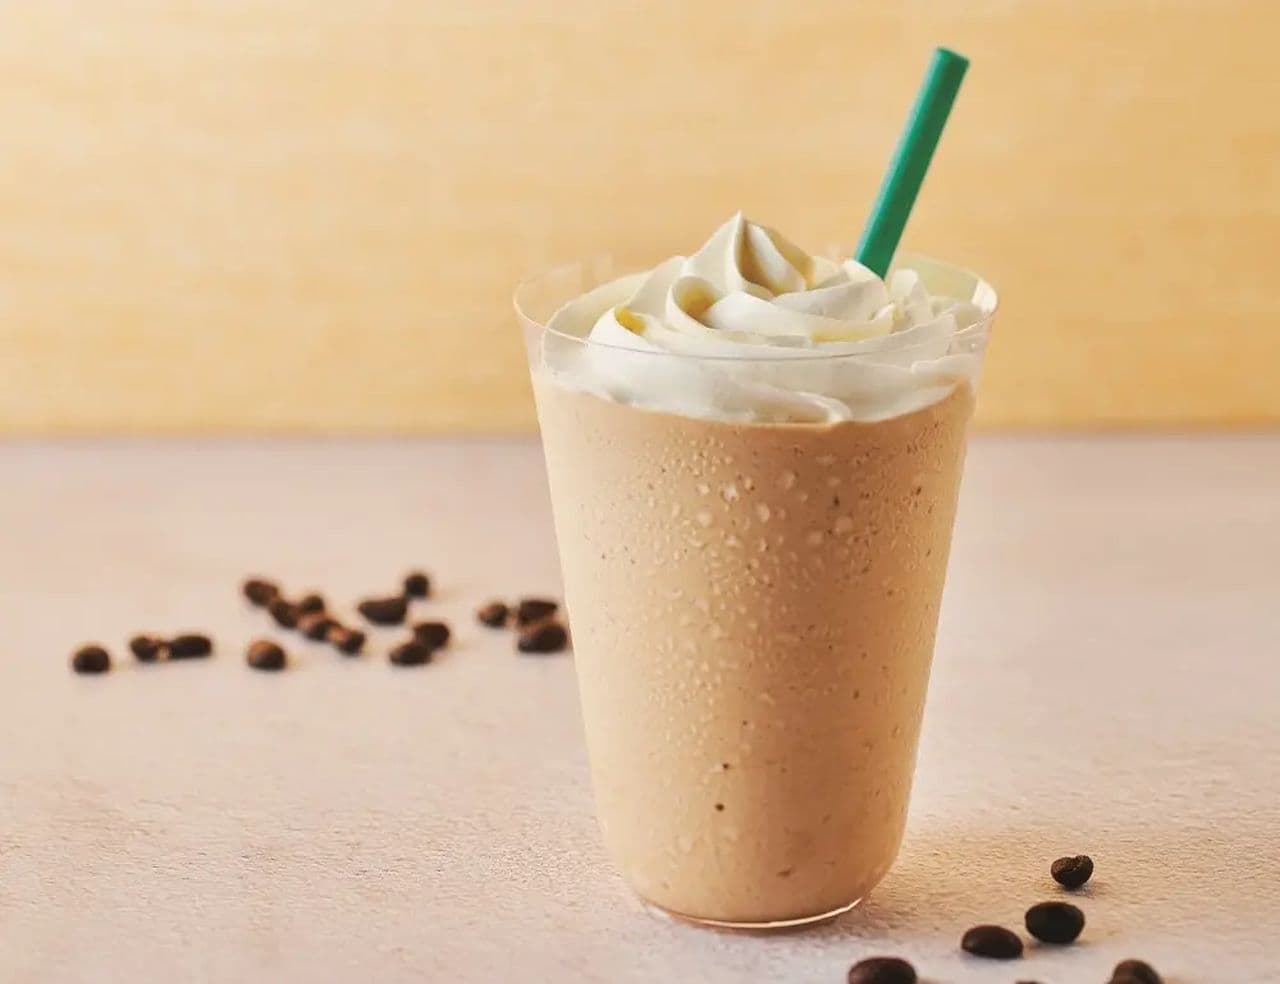 Tully's Coffee "Espresso Shake with Whipped Cream Topping